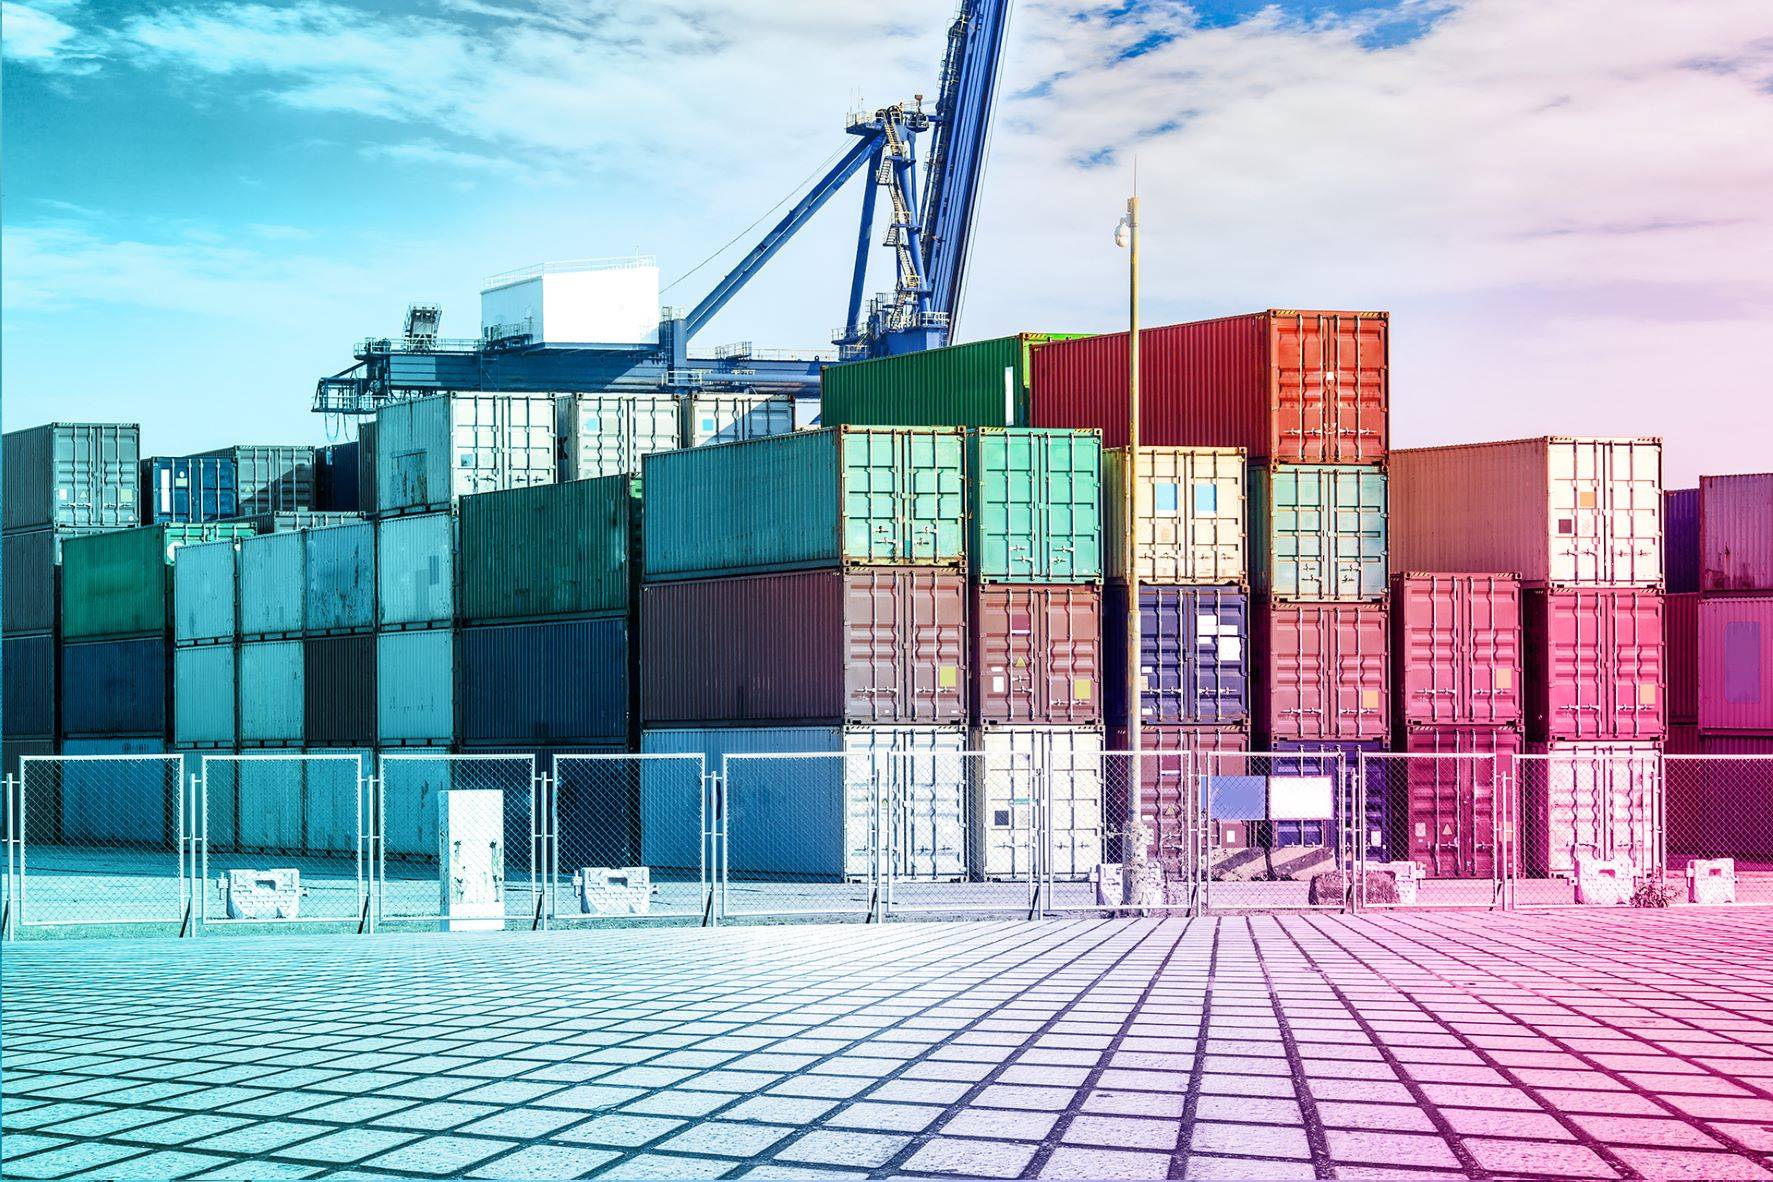 What are Incoterms, and how can online retailers use them?